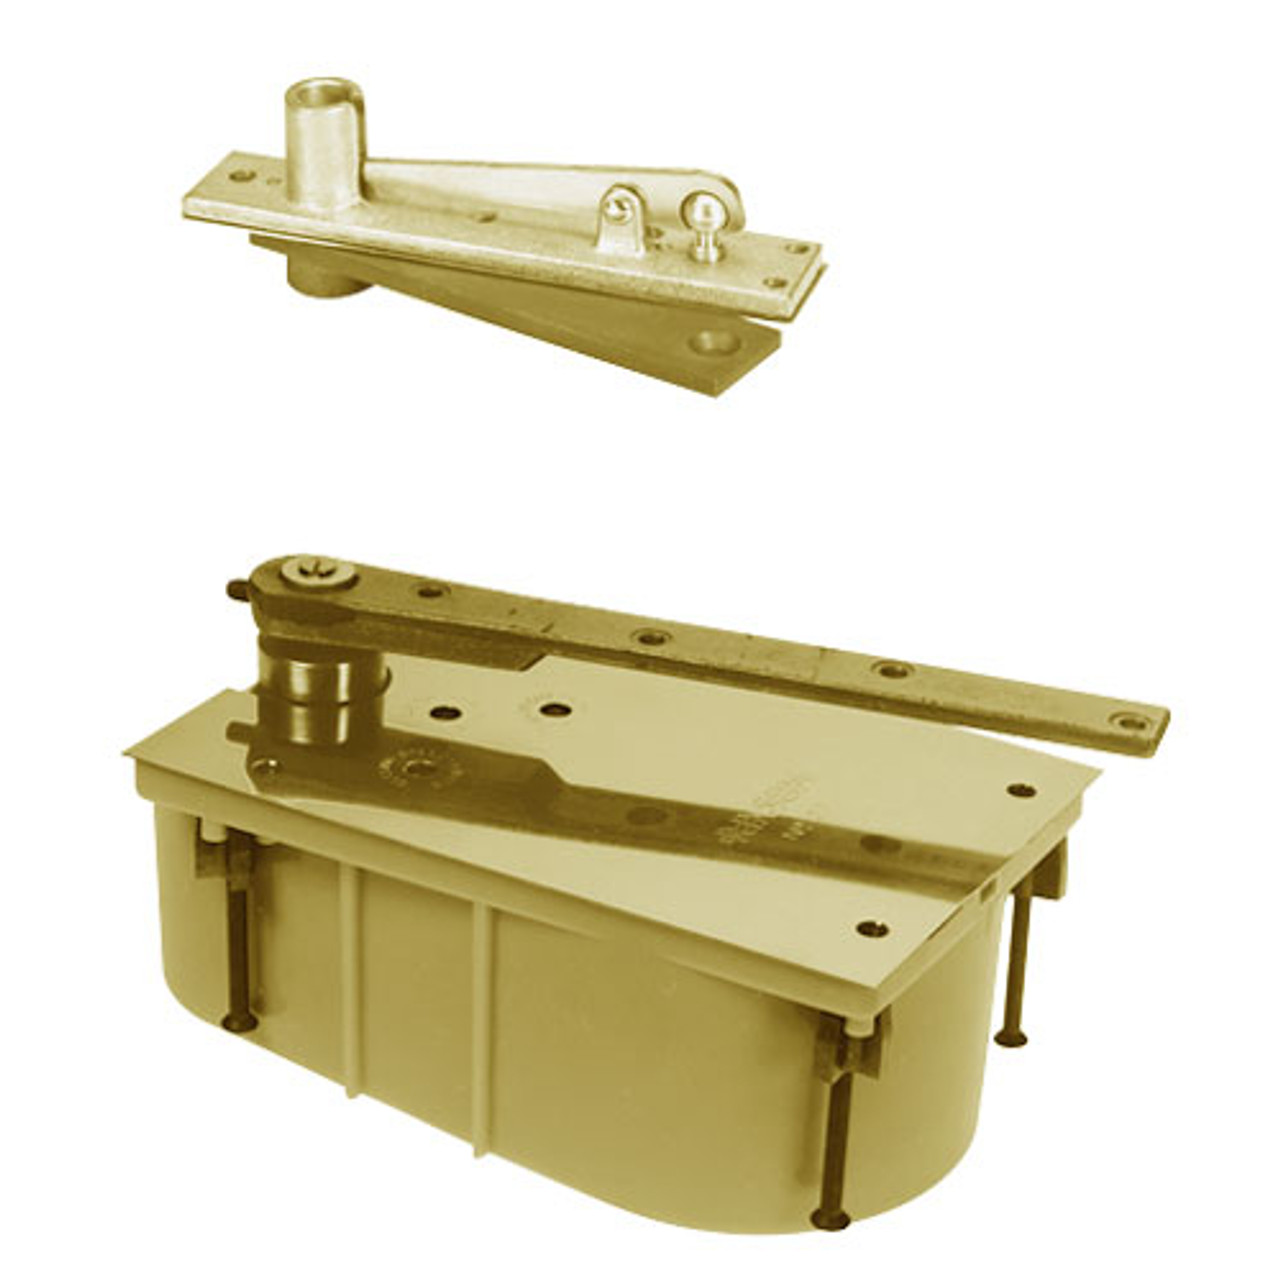 28-105N-554-LTP-LH-606 Rixson 28 Series Heavy Duty Single Acting Center Hung Floor Closer with Concealed Arm in Satin Brass Finish